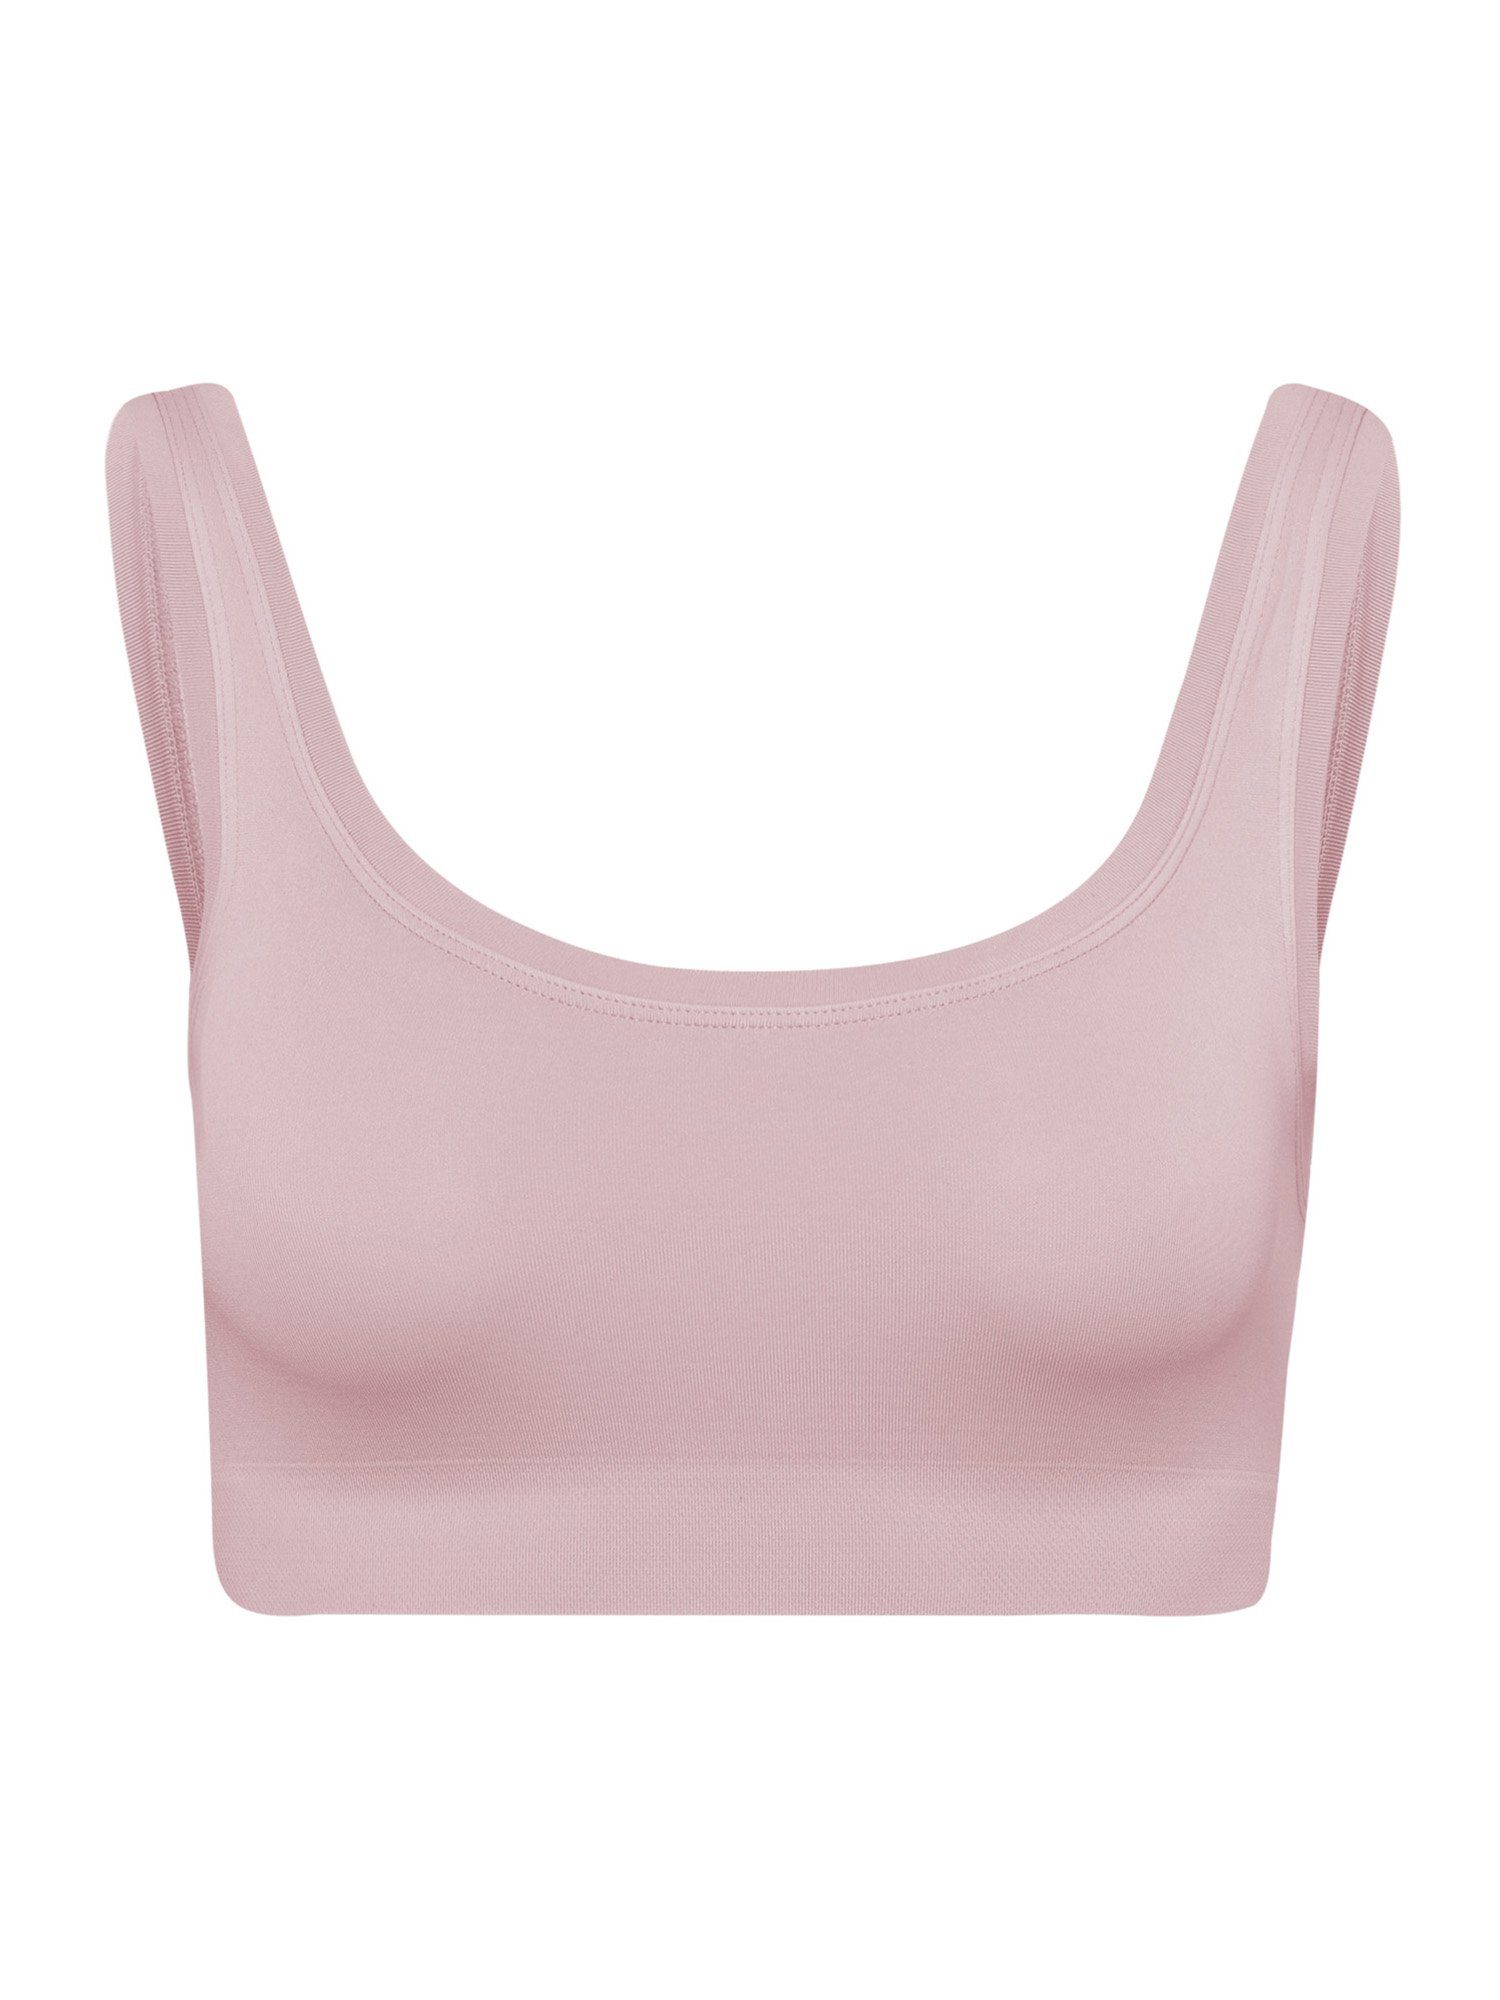 Hanro Bustier Touch Feeling crepe pink